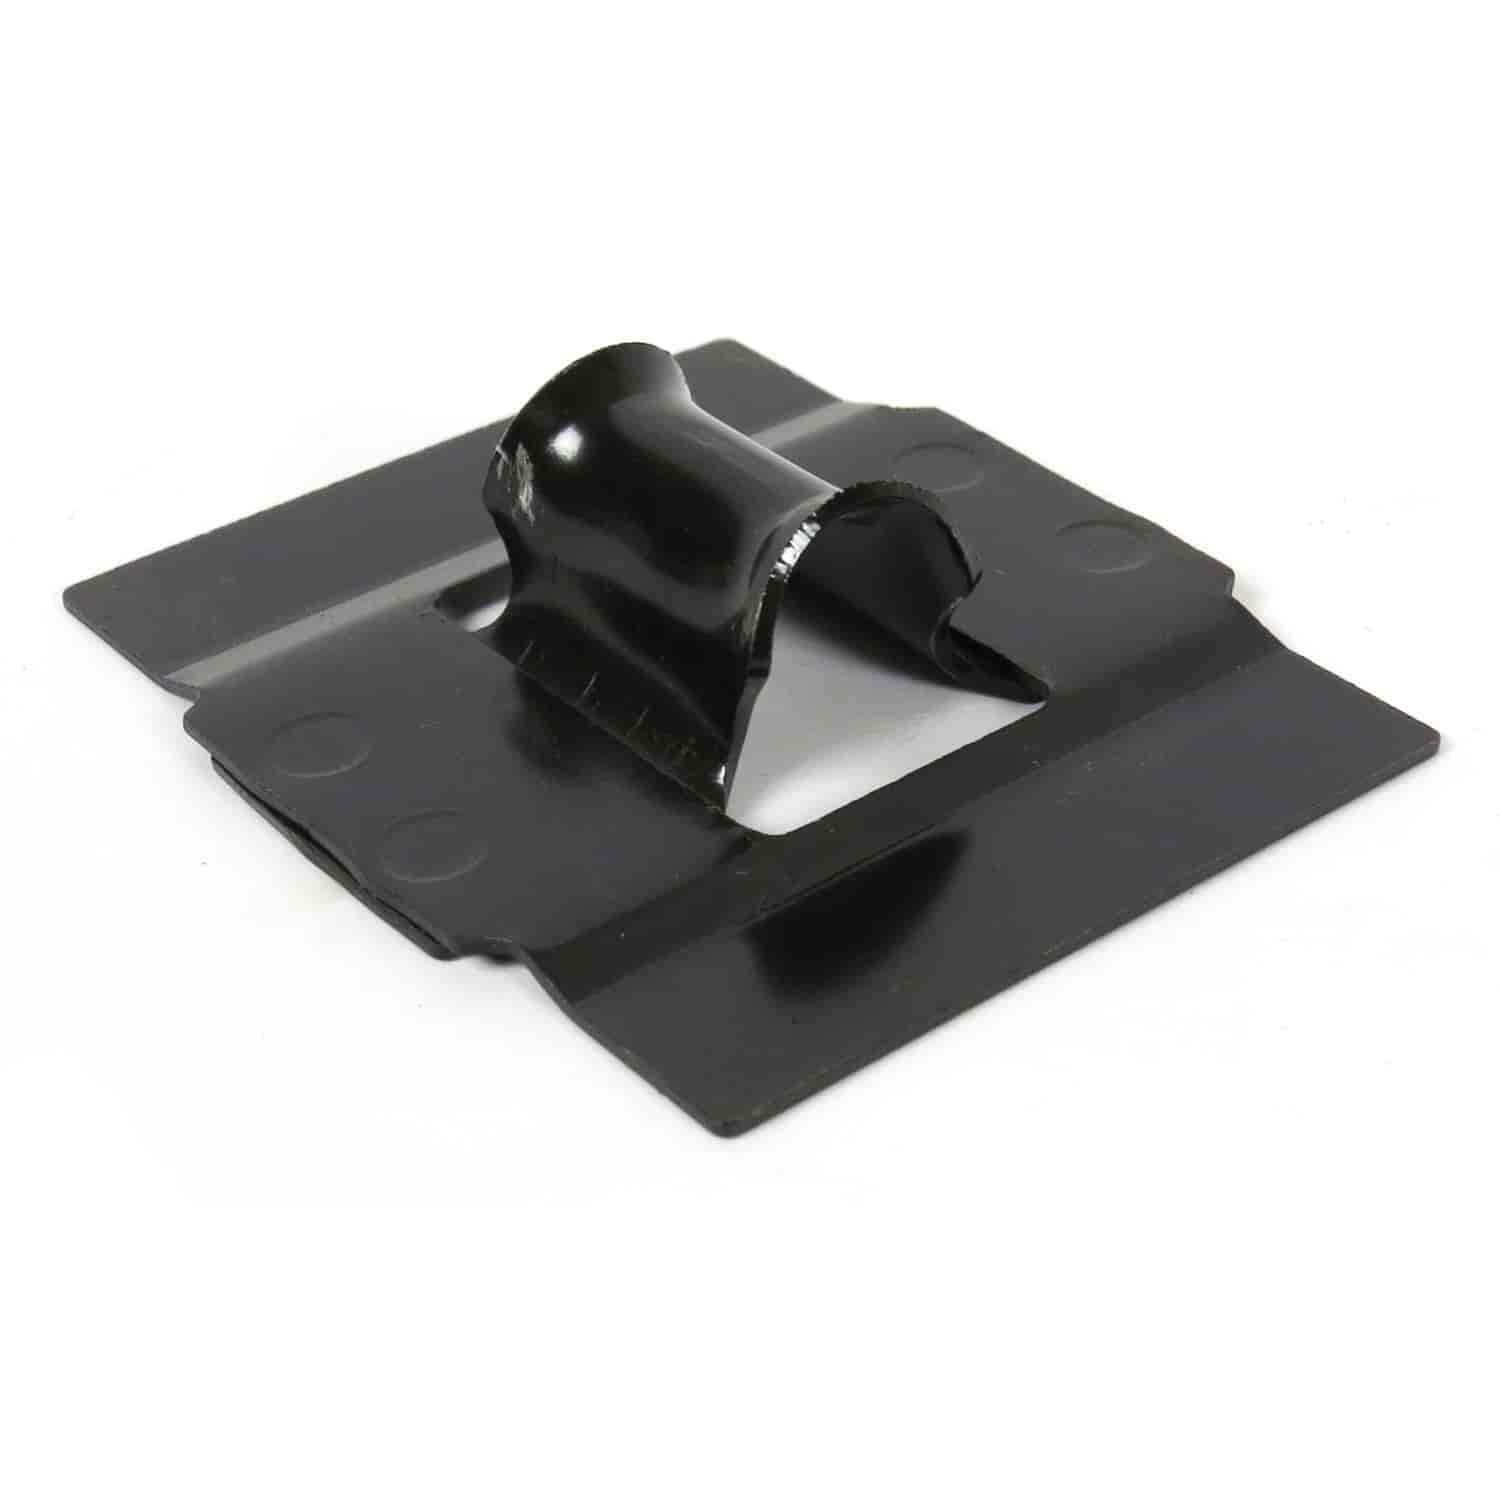 TF02-62STB Spare Tire Hold Down Bracket for Select 1962-1970 Buick, Chevy, Oldsmobile, Pontiac Models